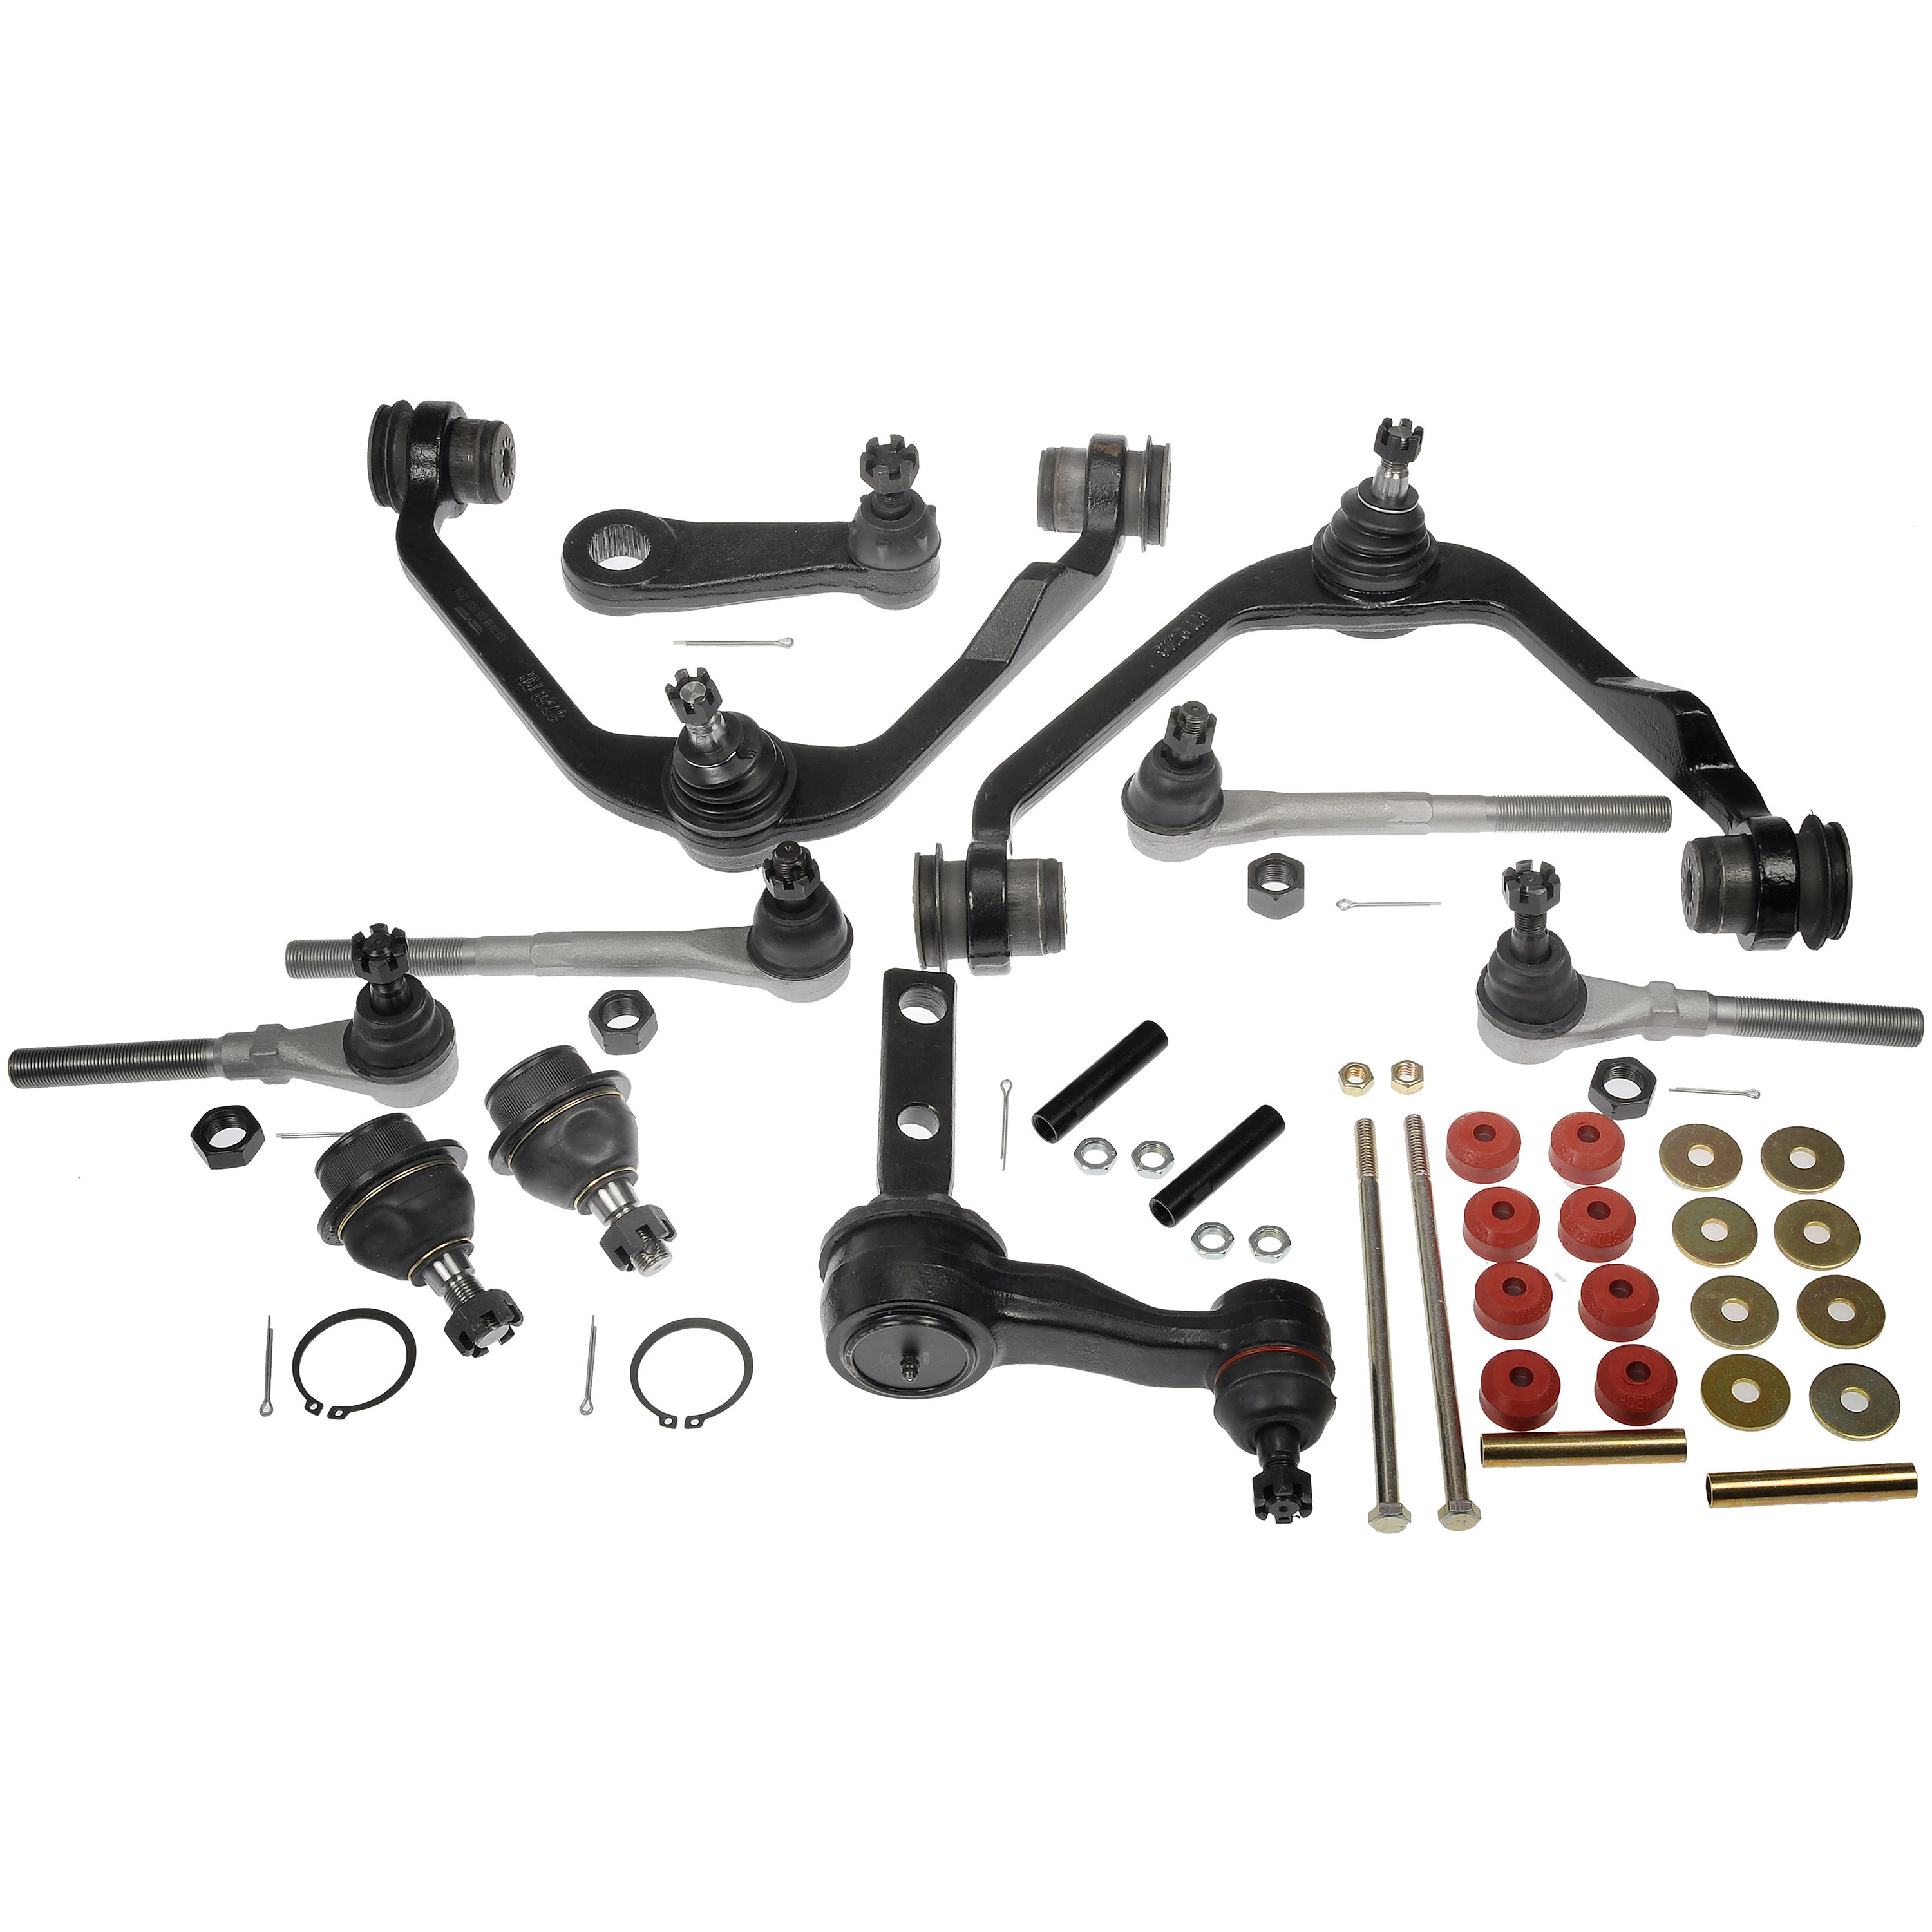 Dorman FEK87029XL Front Suspension Kit for Specific Ford / Lincoln Models Fits select: 1997-2003 FORD F150, 1997-2002 FORD EXPEDITION - image 1 of 5